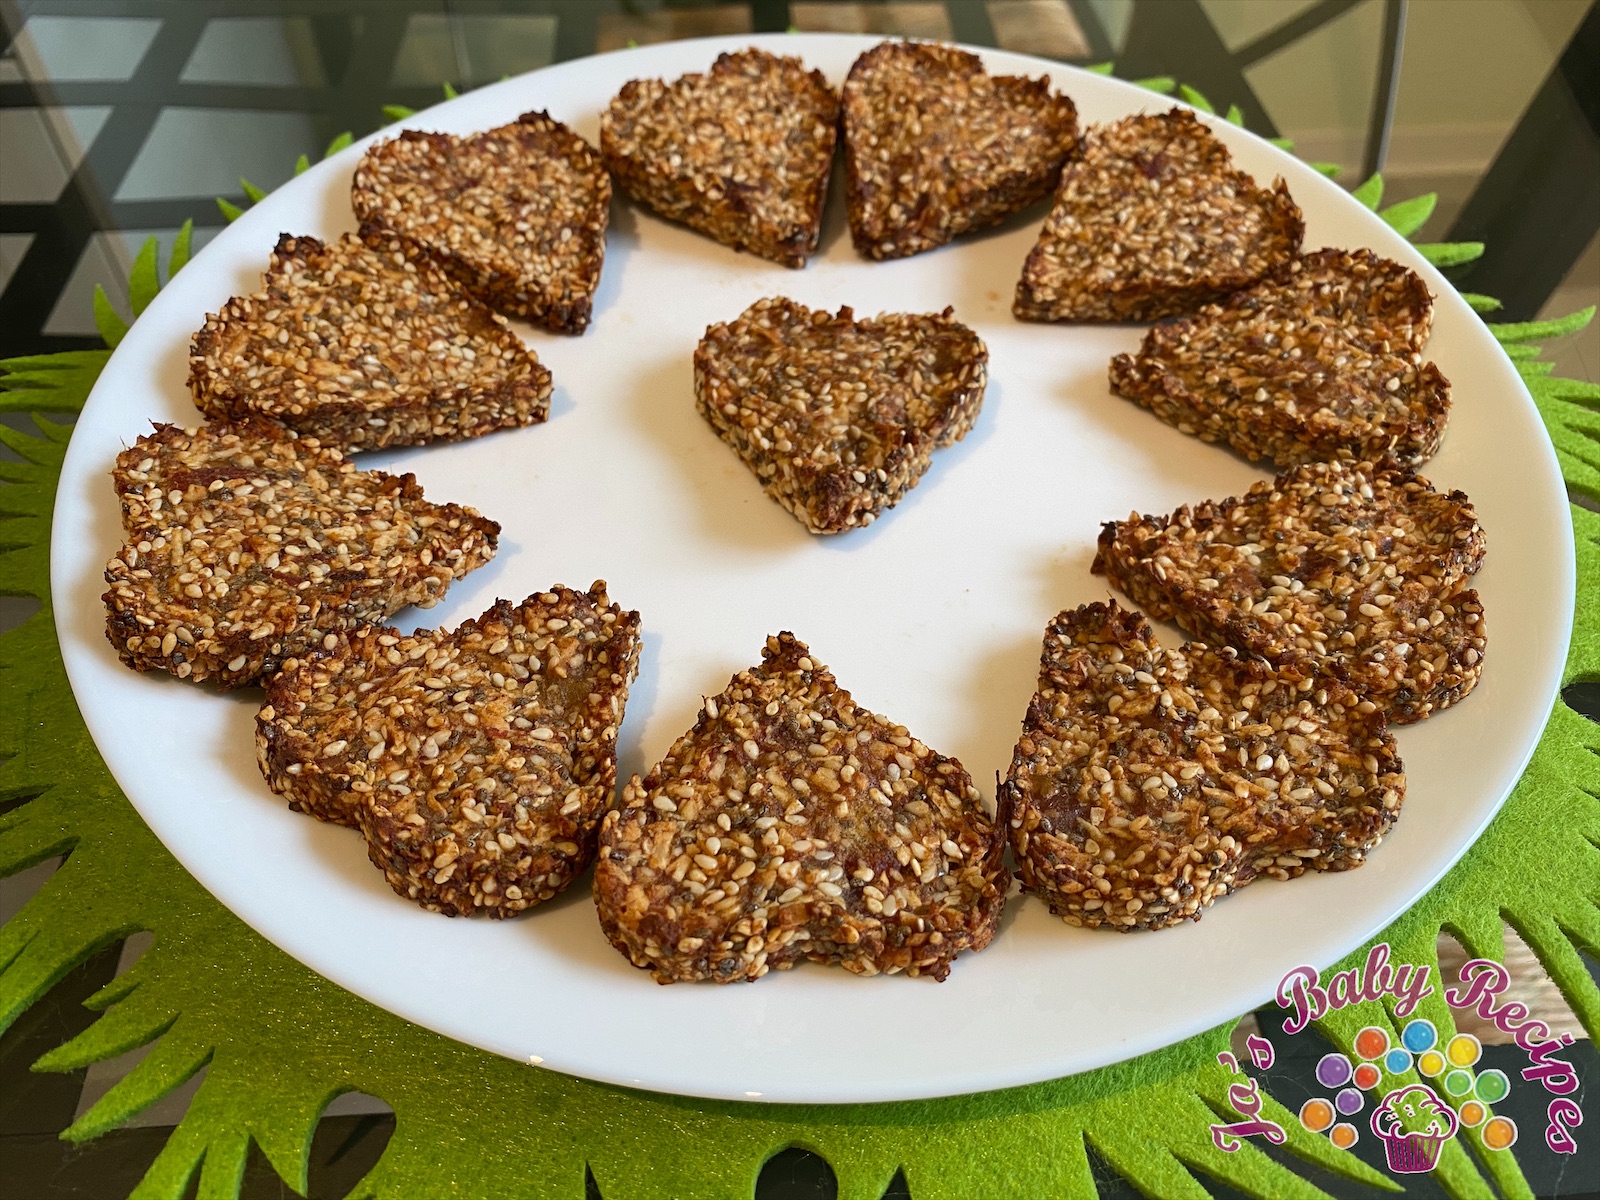 Baby friendly biscuits with dates palm paste, coconut flakes and seeds